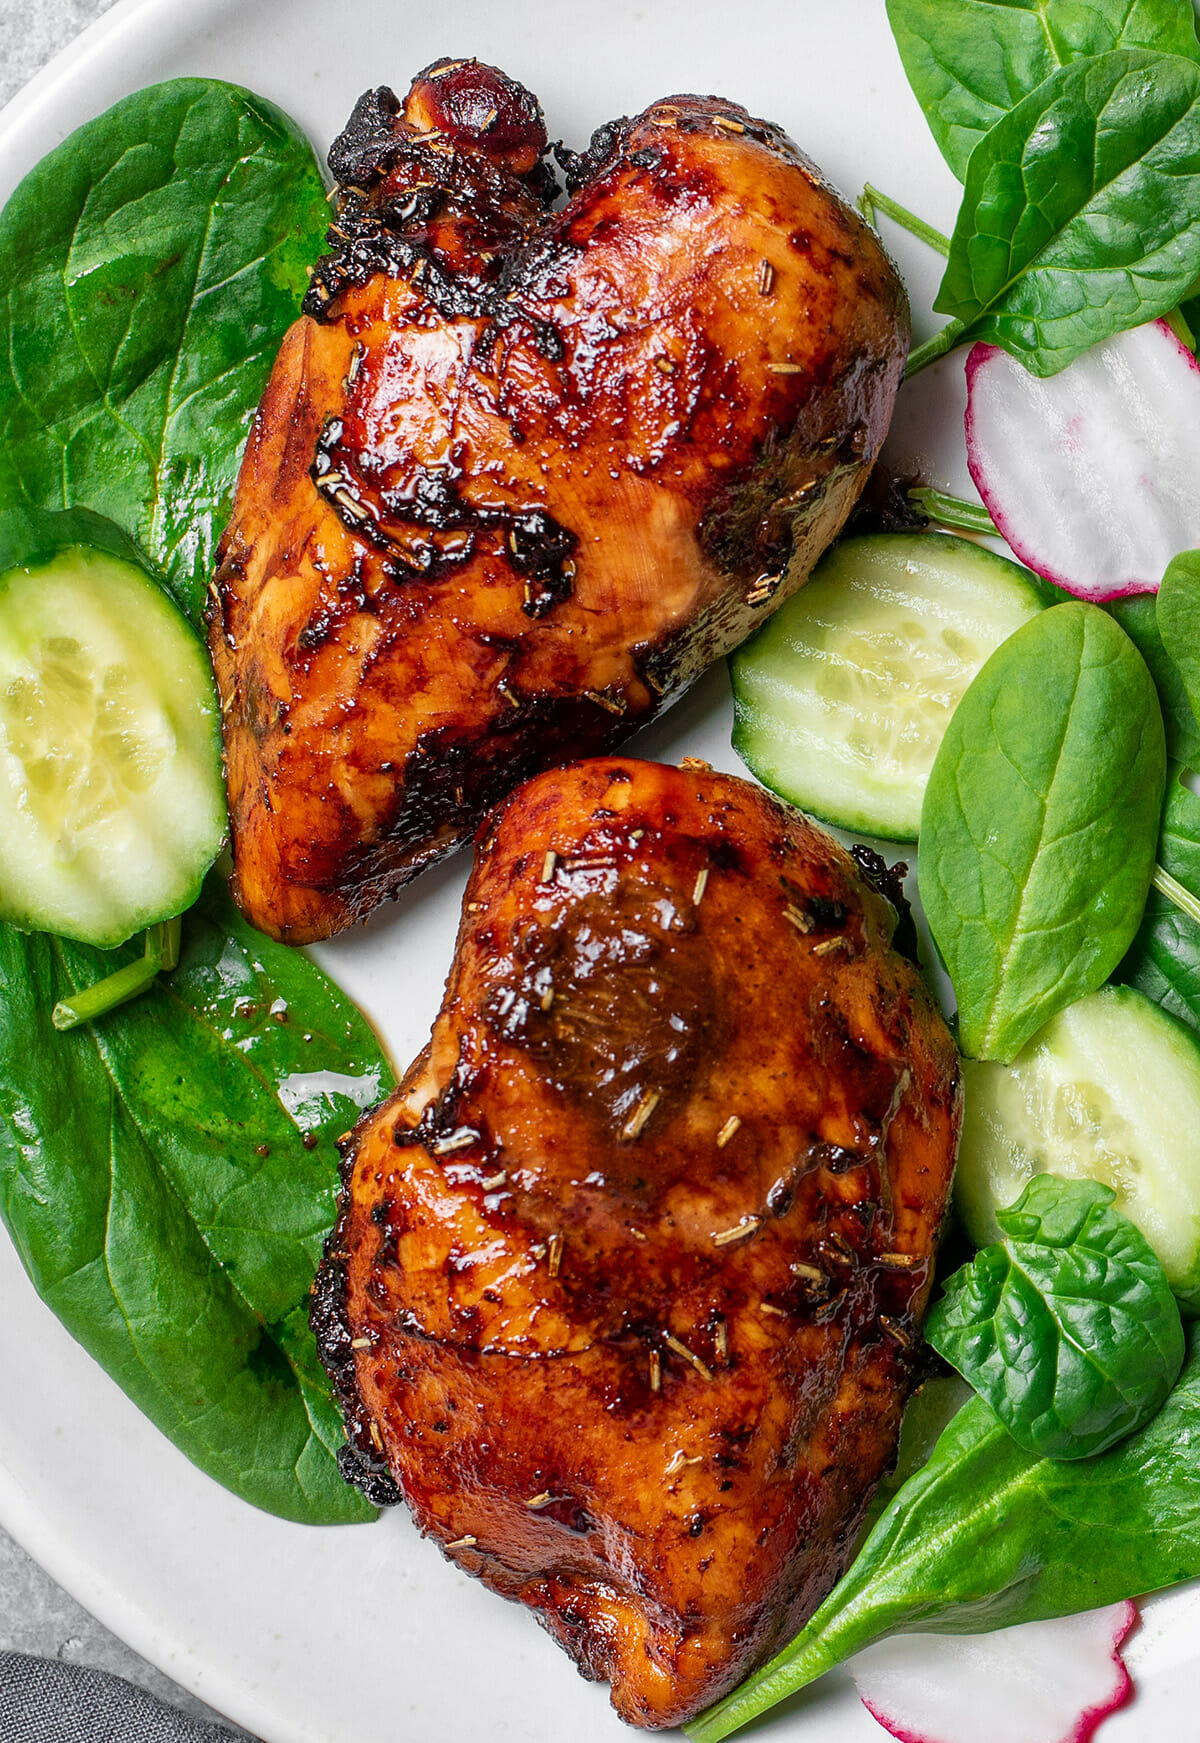 Boneless, skinless marinated chicken breasts made in an air fryer with this easy recipe.